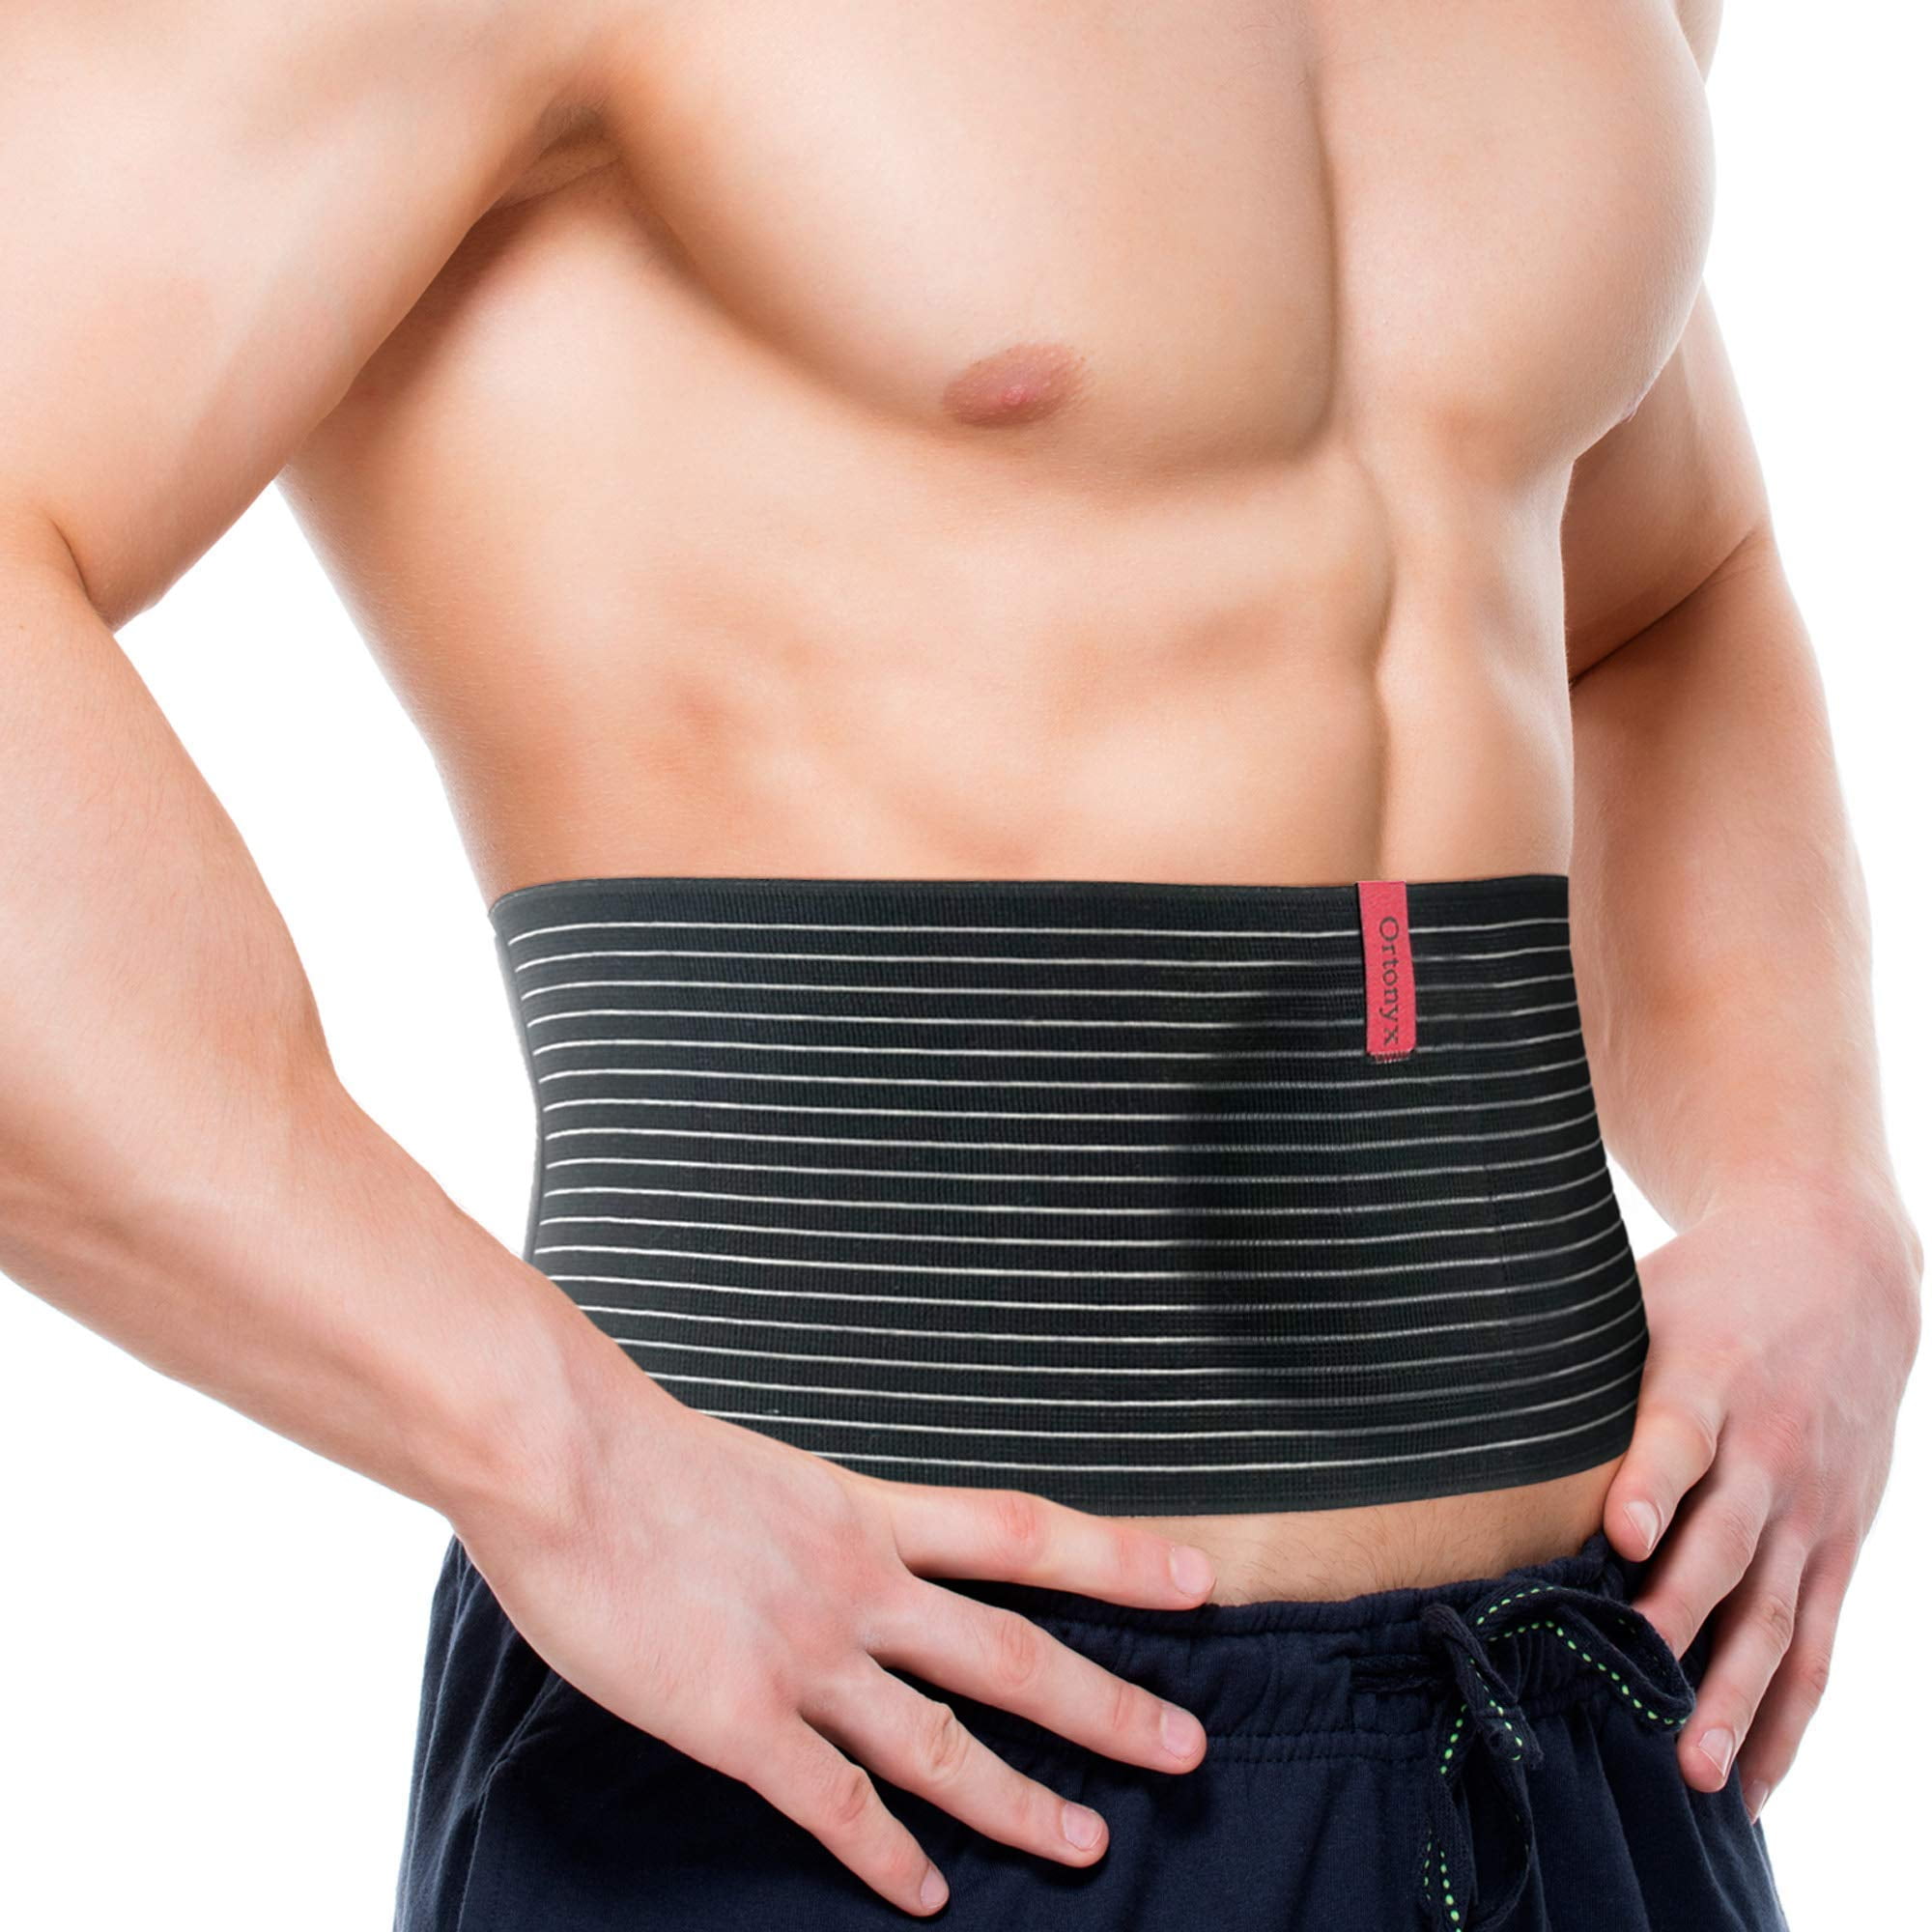 Umbilical Hernia Belt, Hernia Belly Tie With Removable Compression Pad,  Hernia Pain Relief 